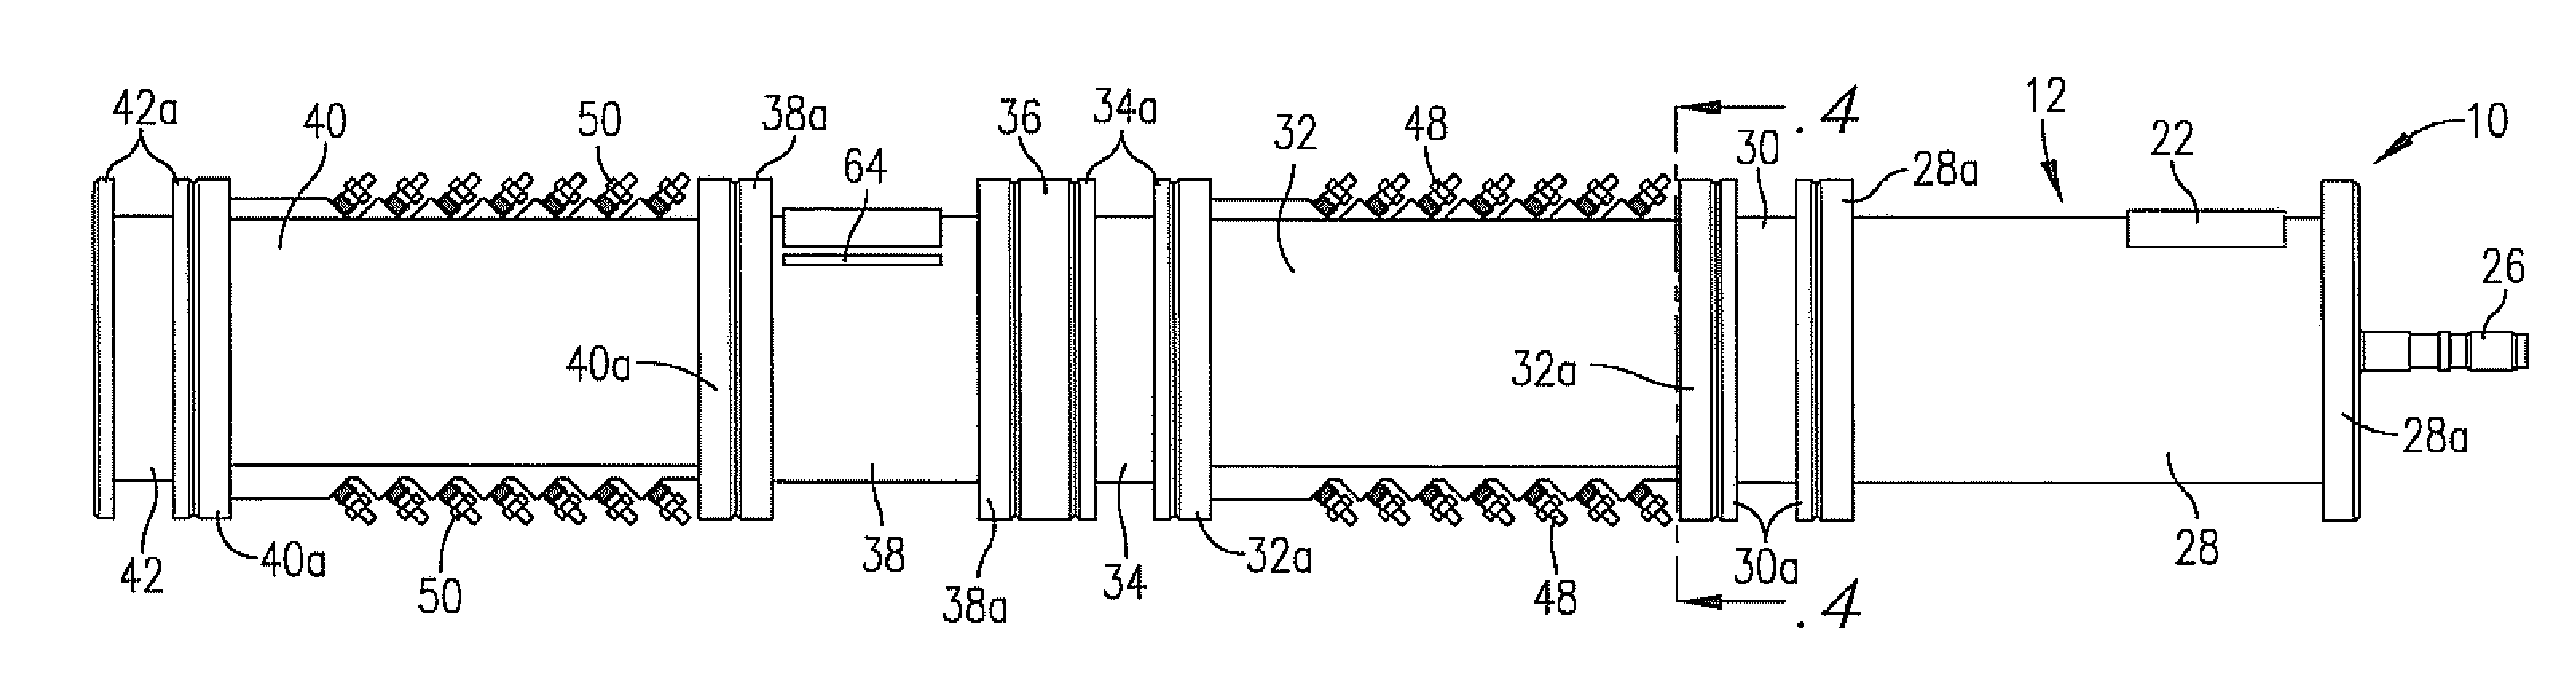 Cooking extruder with enhanced steam injection properties